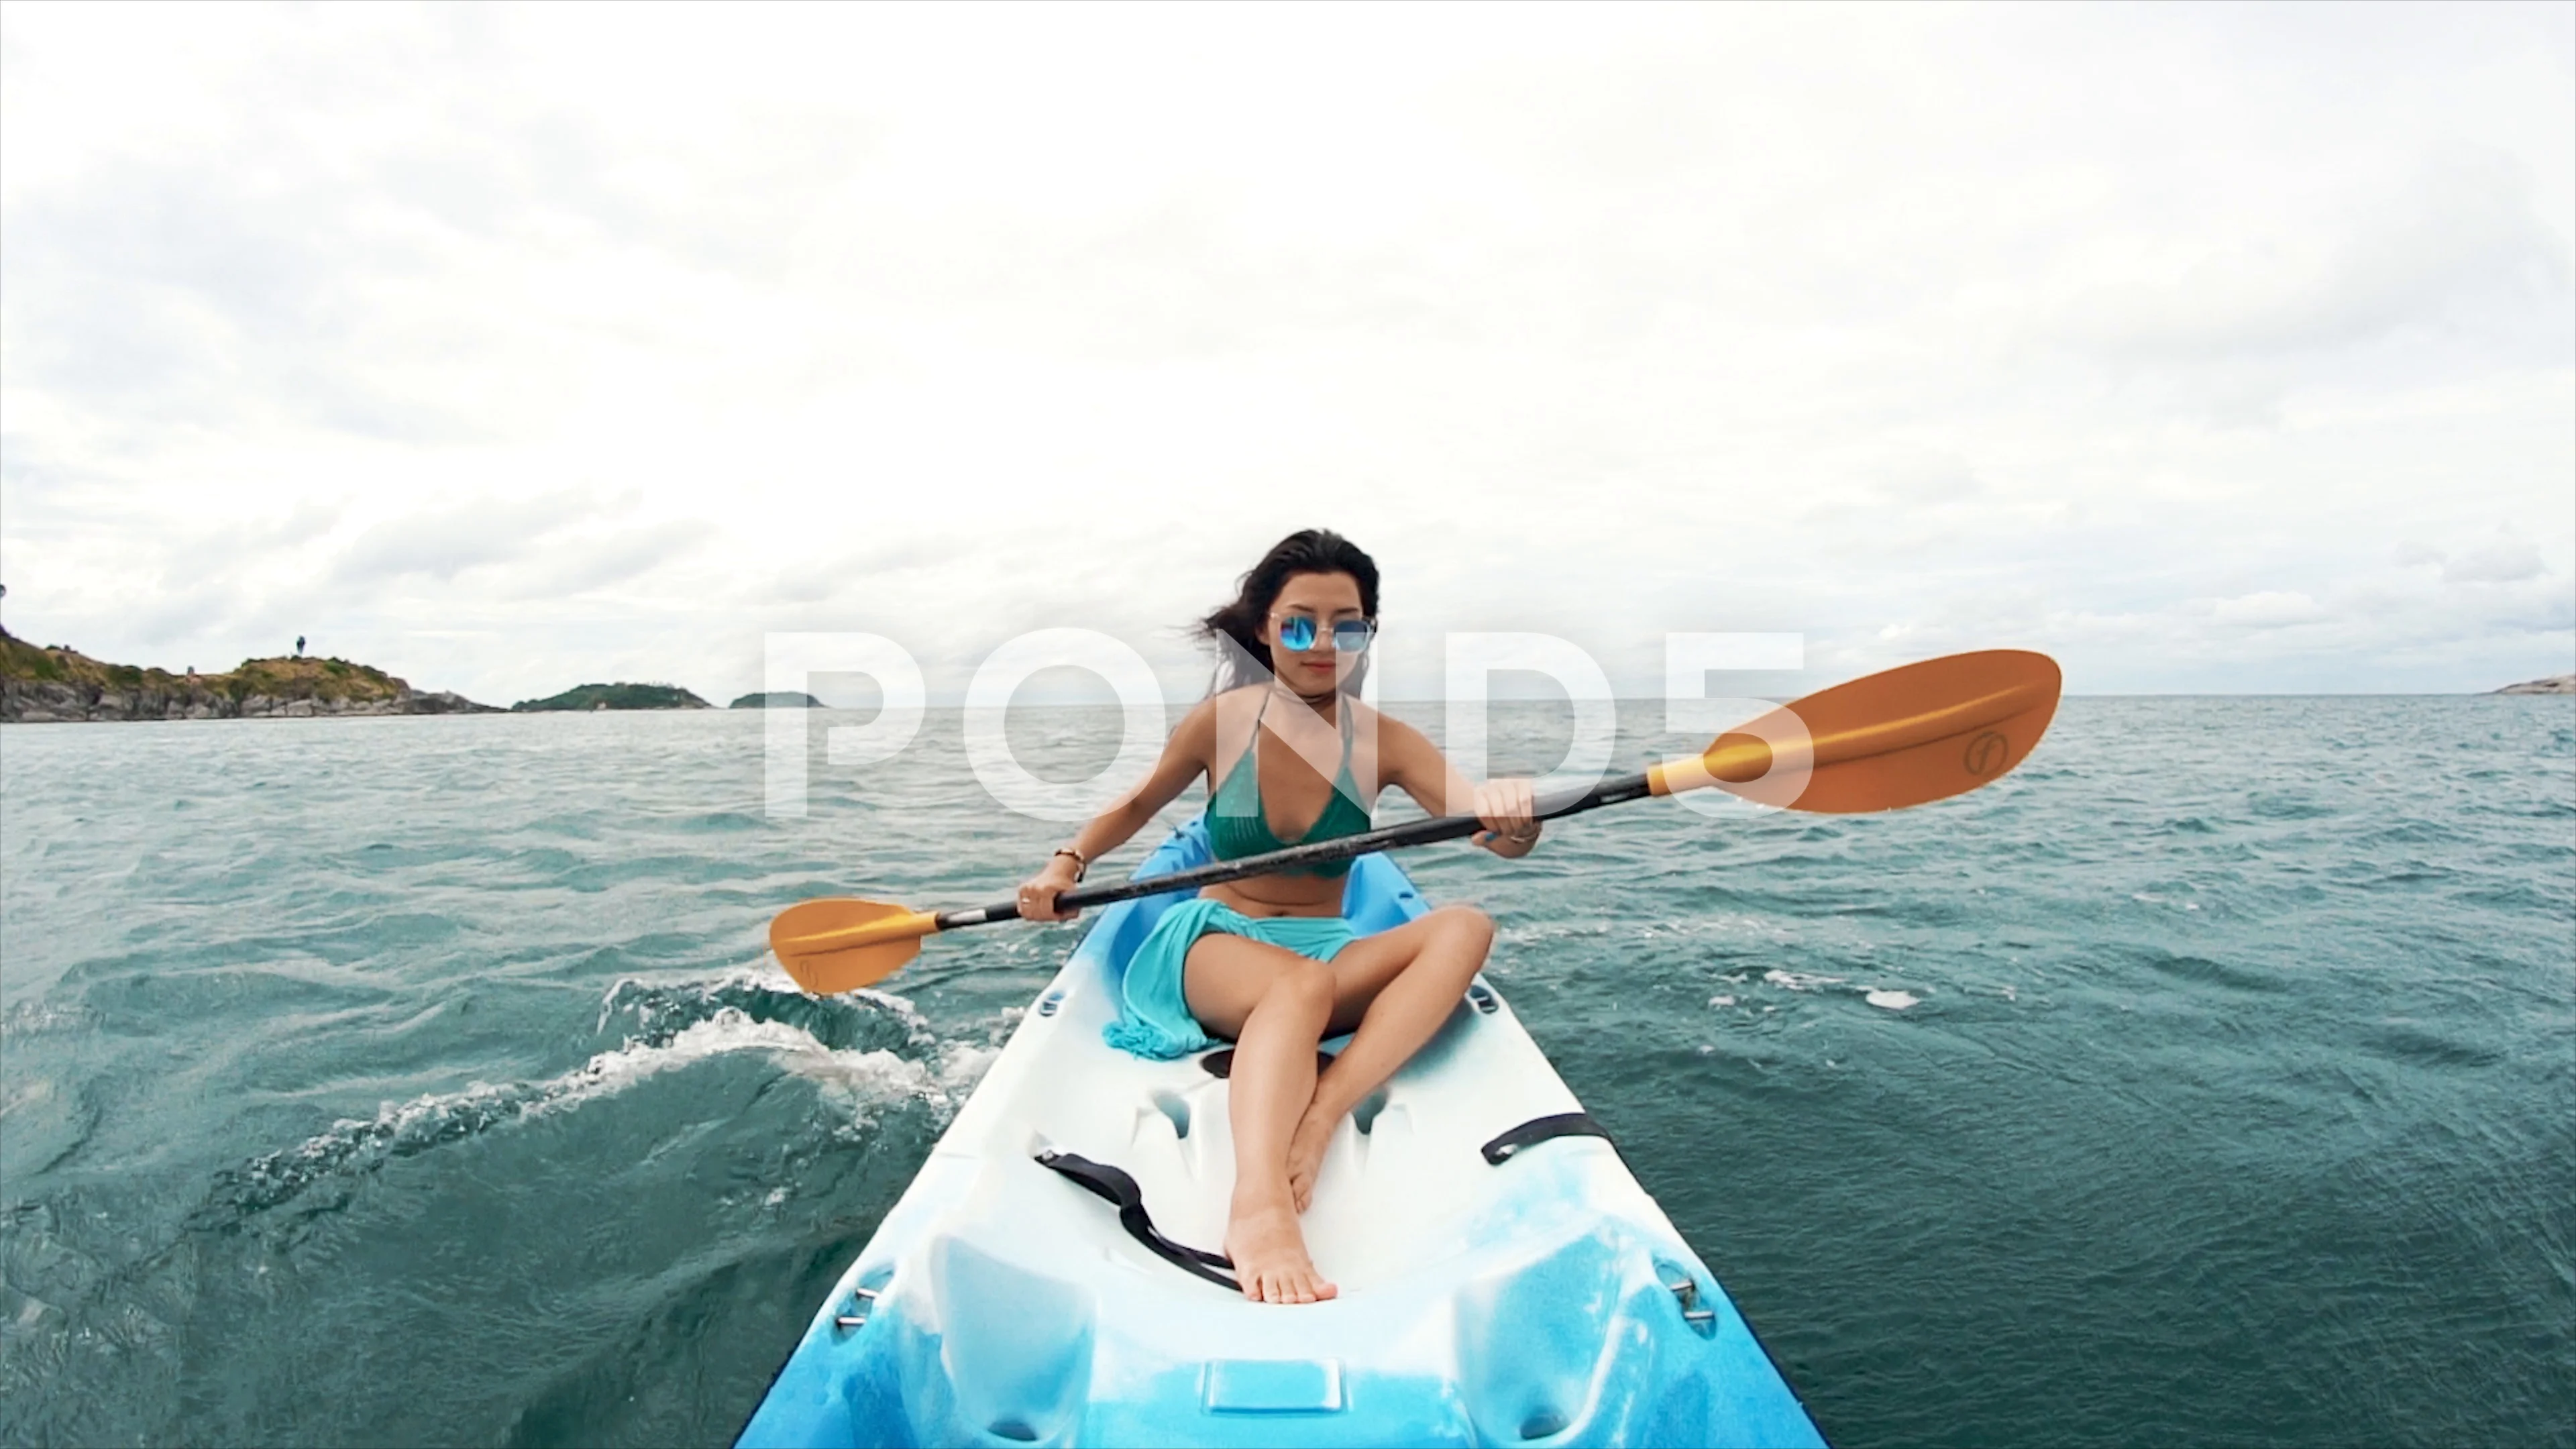 https://images.pond5.com/young-pretty-woman-sunglasses-rowing-072525004_prevstill.jpeg